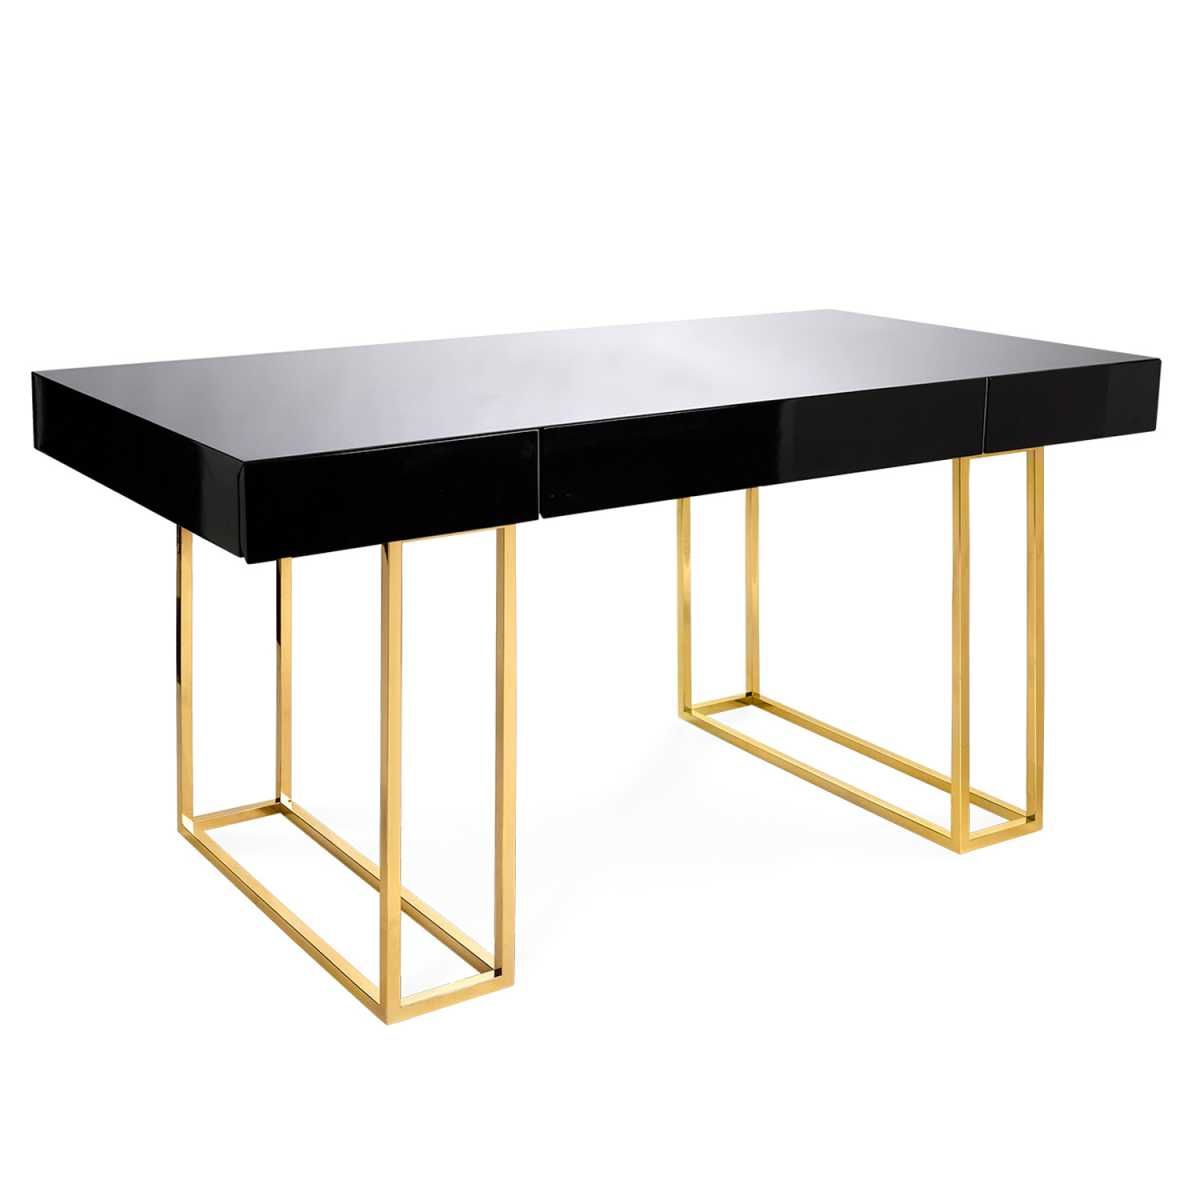 Jonathan Adler Caine Desk Pertaining To Caines Credenzas (View 30 of 30)